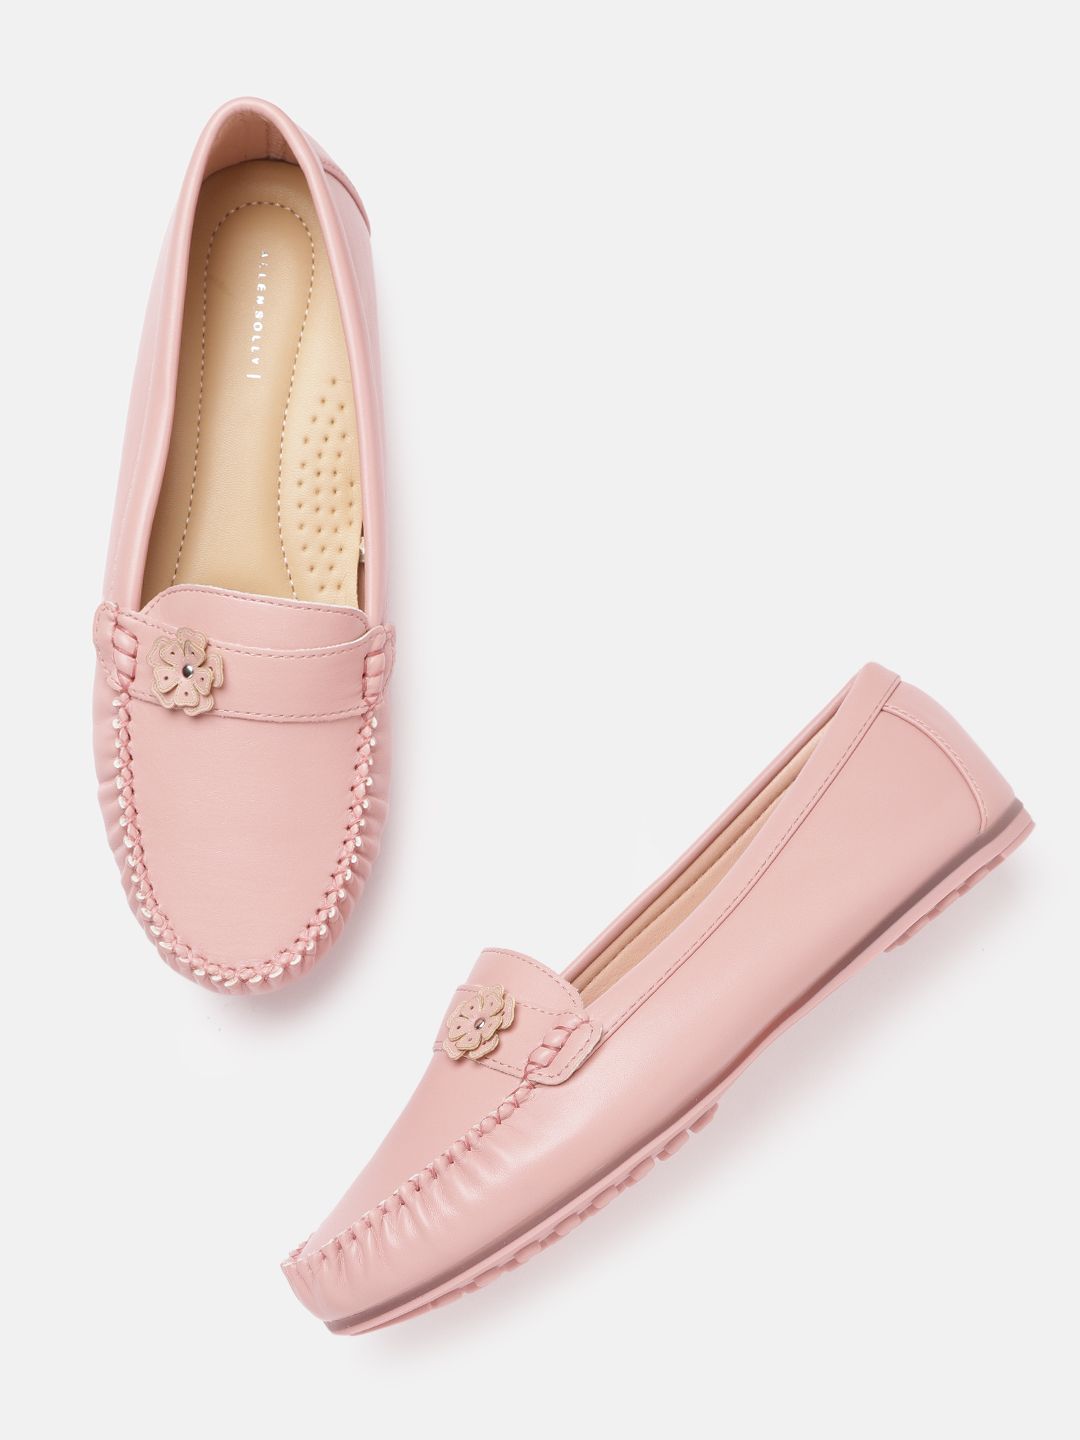 Allen Solly Women Peach-Coloured Solid Loafers with Floral Applique Price in India